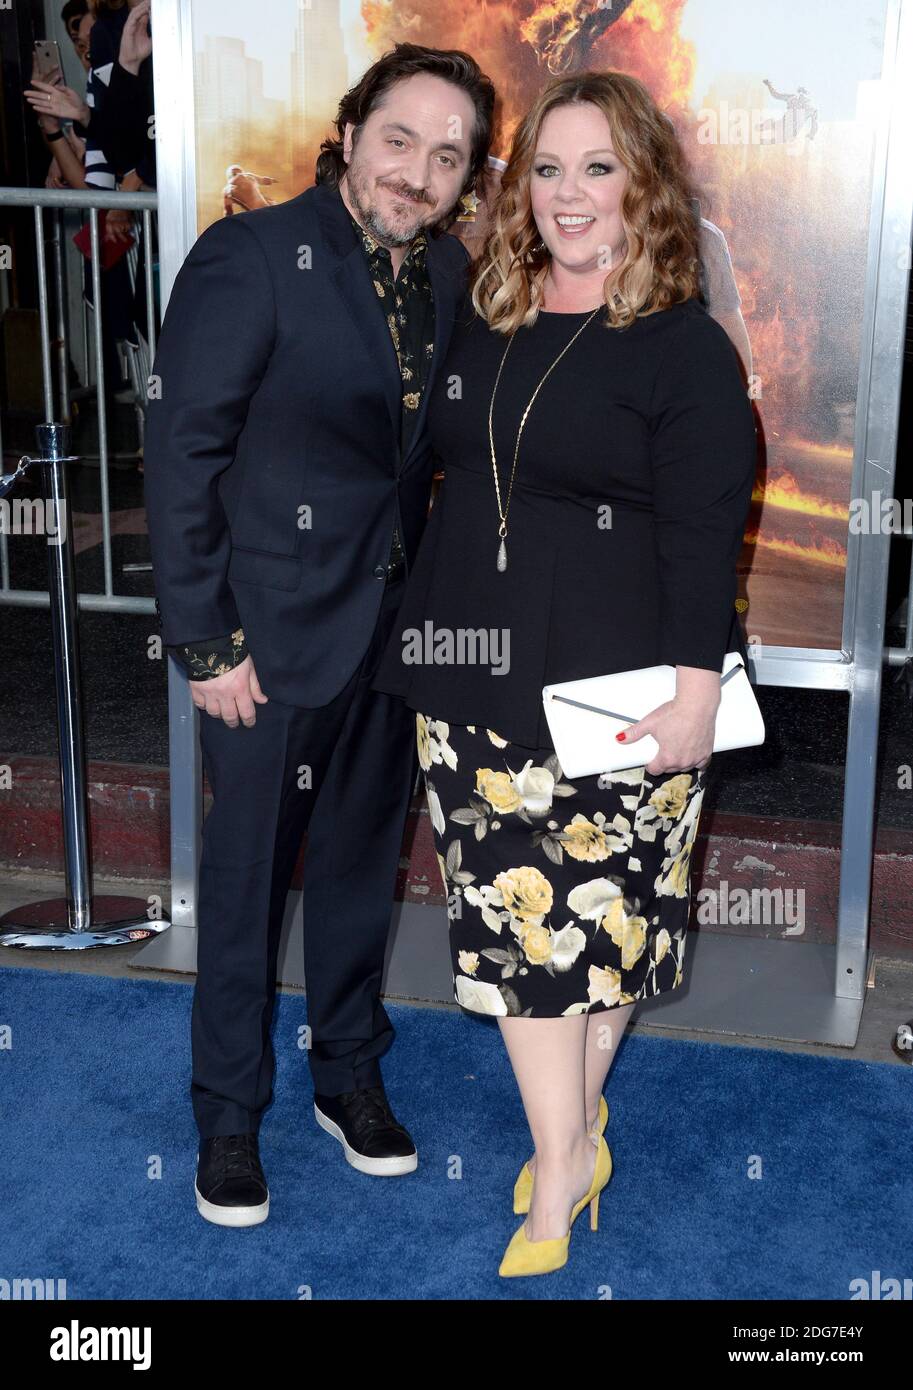 Ben Falcone and Melissa McCarthy attend the premiere of Warner Bros. Pictures Chips at TCL Chinese Theatre on March 20, 2017 in Los Angeles, CA, USA. Photo by Lionel Hahn/ABACAPRESS.COM Stock Photo